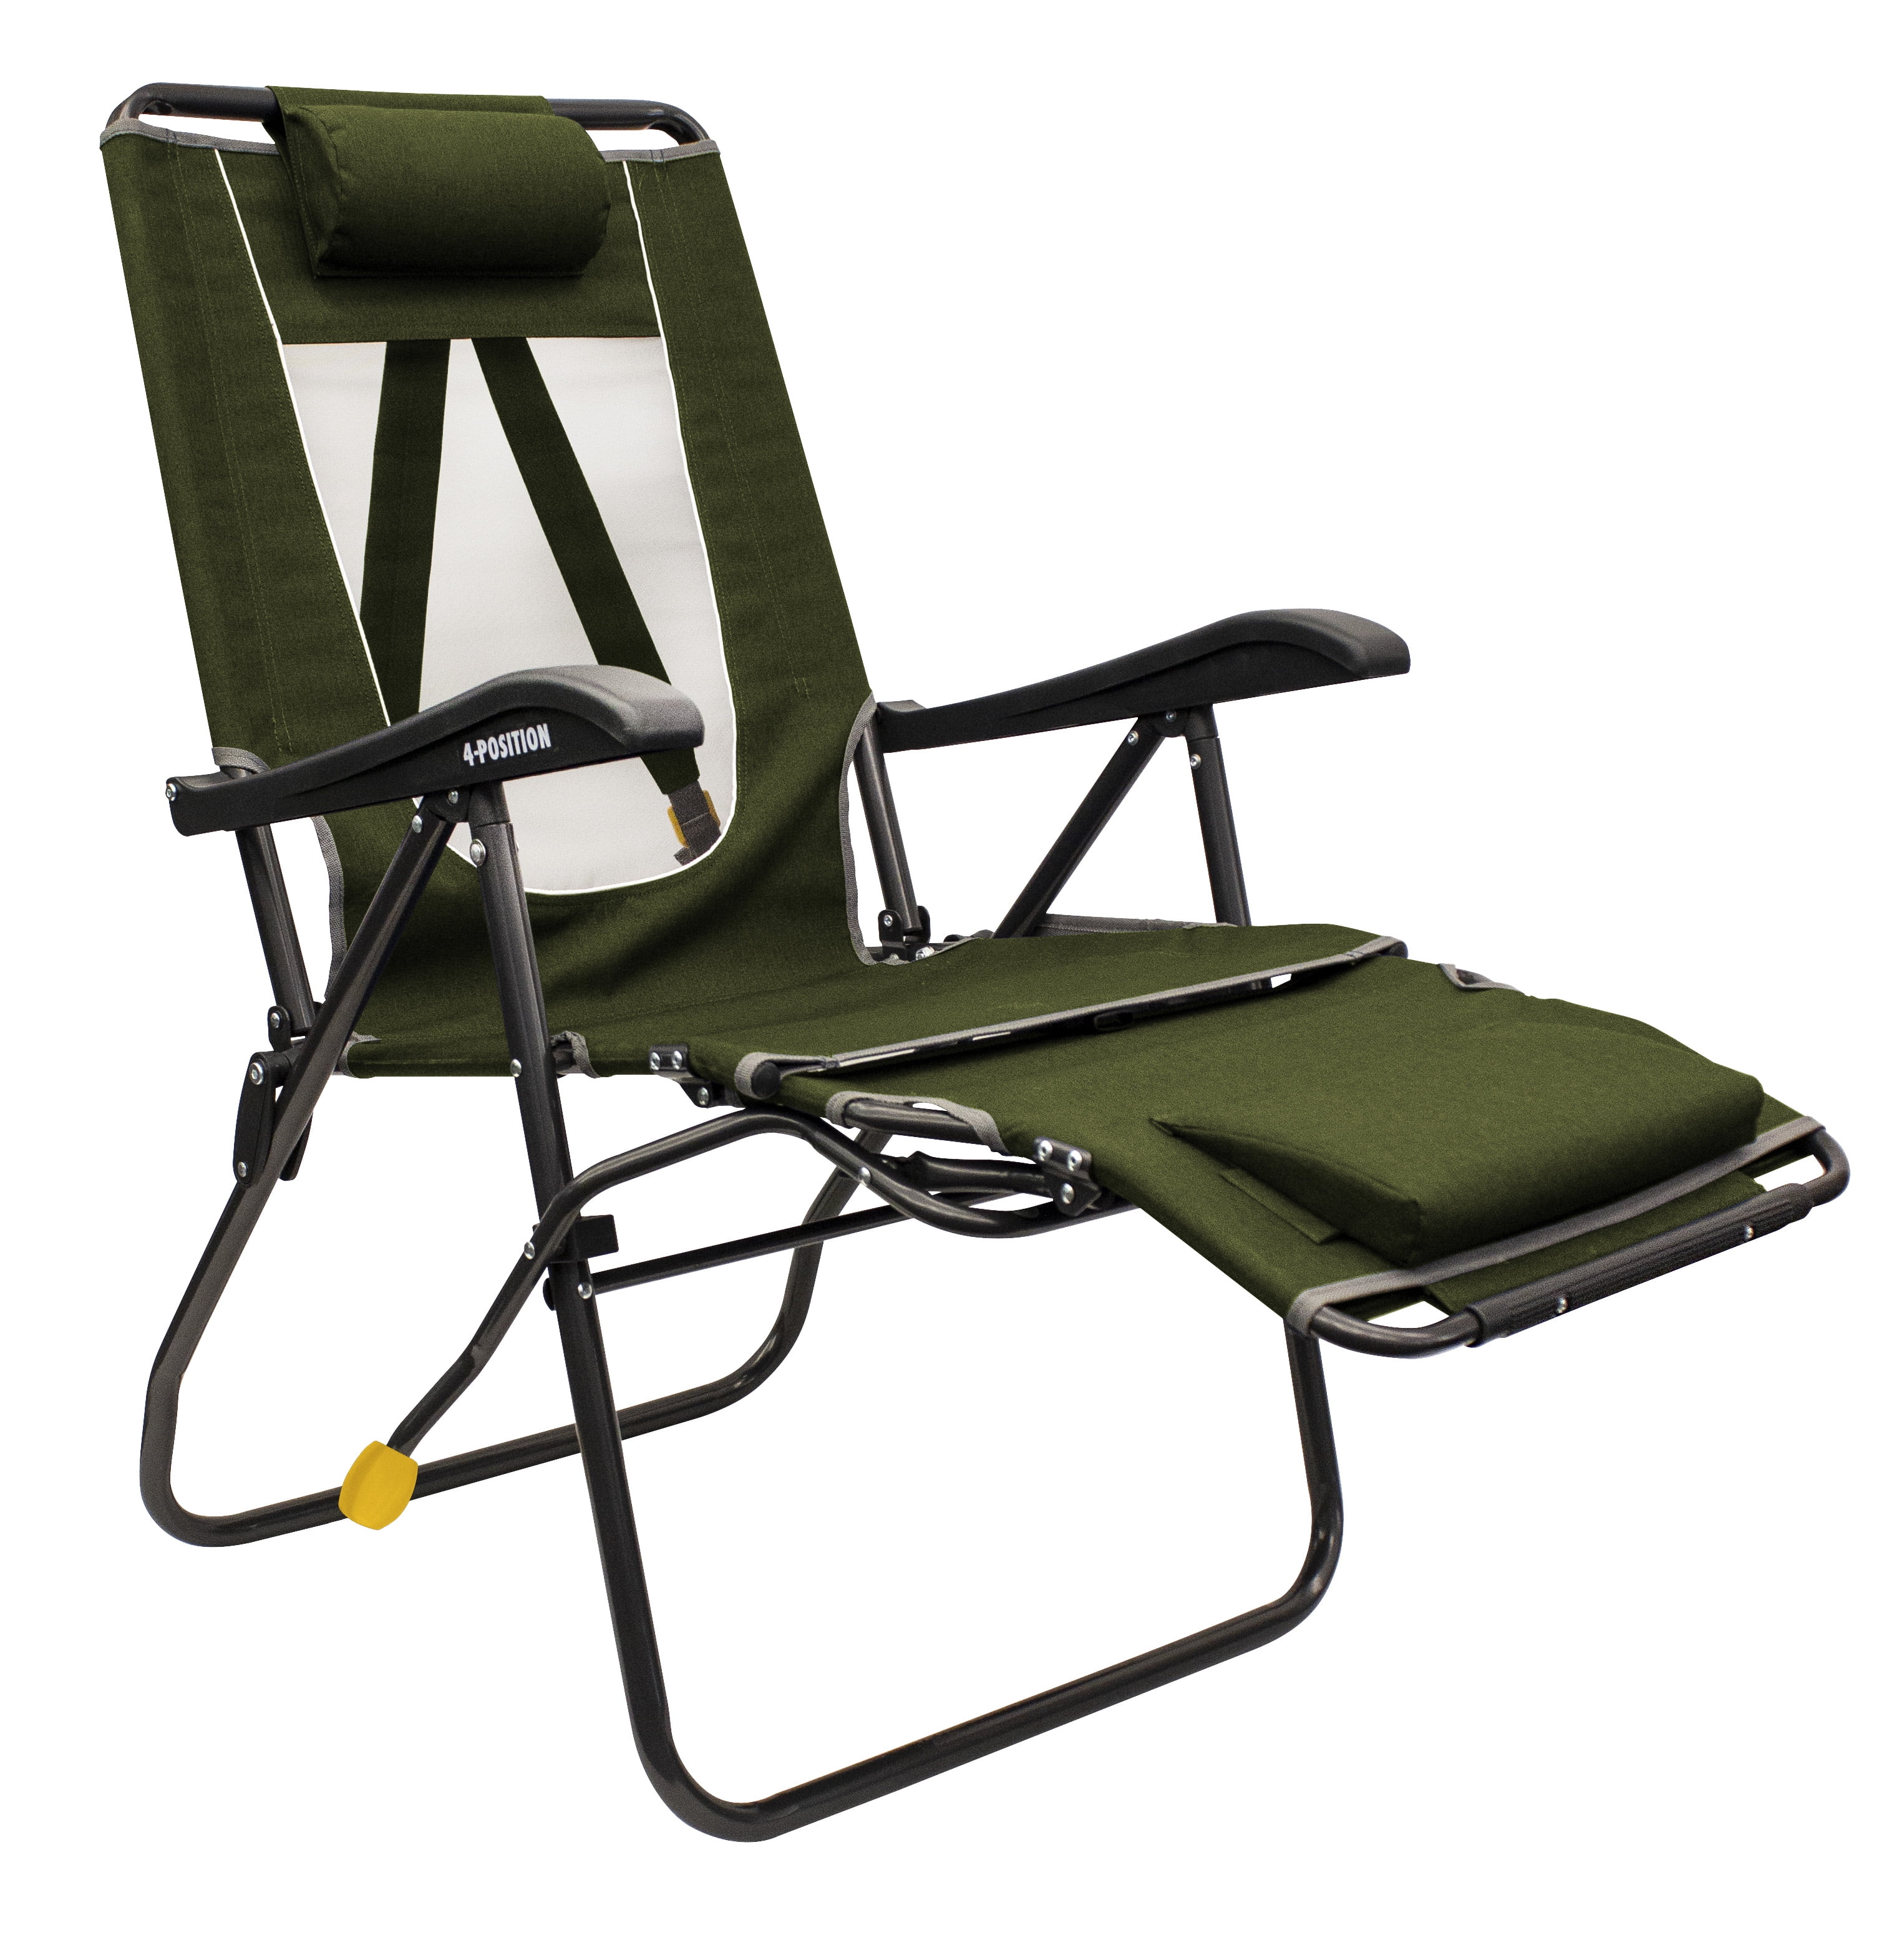 GCI Outdoor Legz up Lounger, Heathered Loden Green, Adult Chair ...